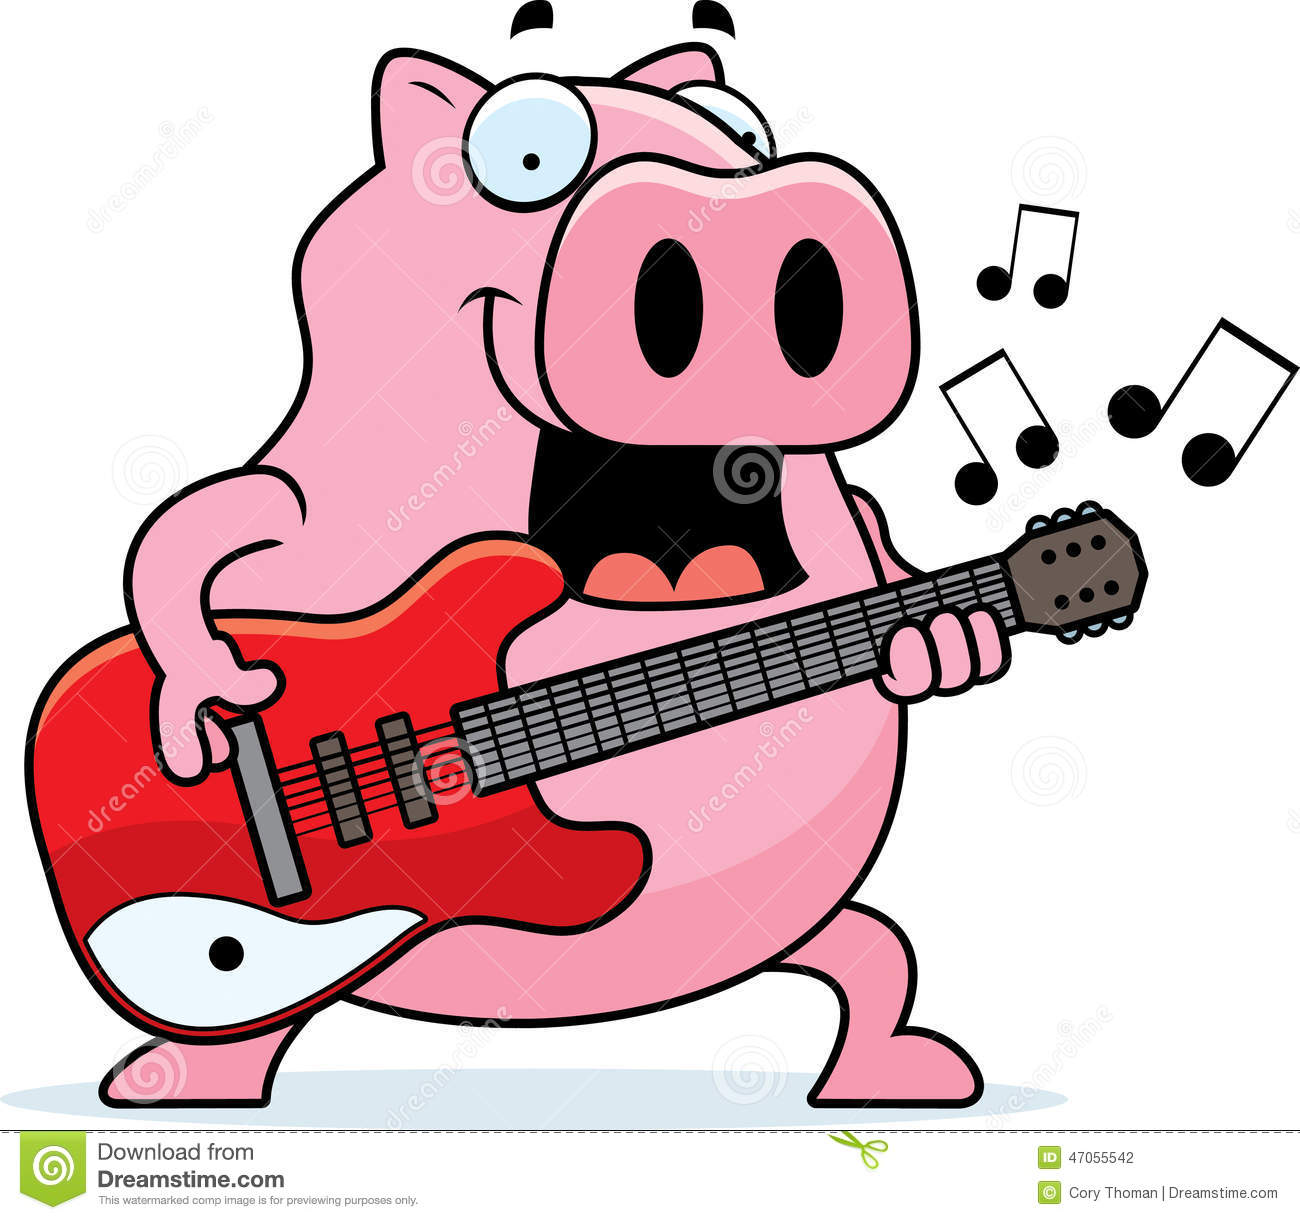 Cartoon Illustration Of A Pig Playing An Electric Guitar